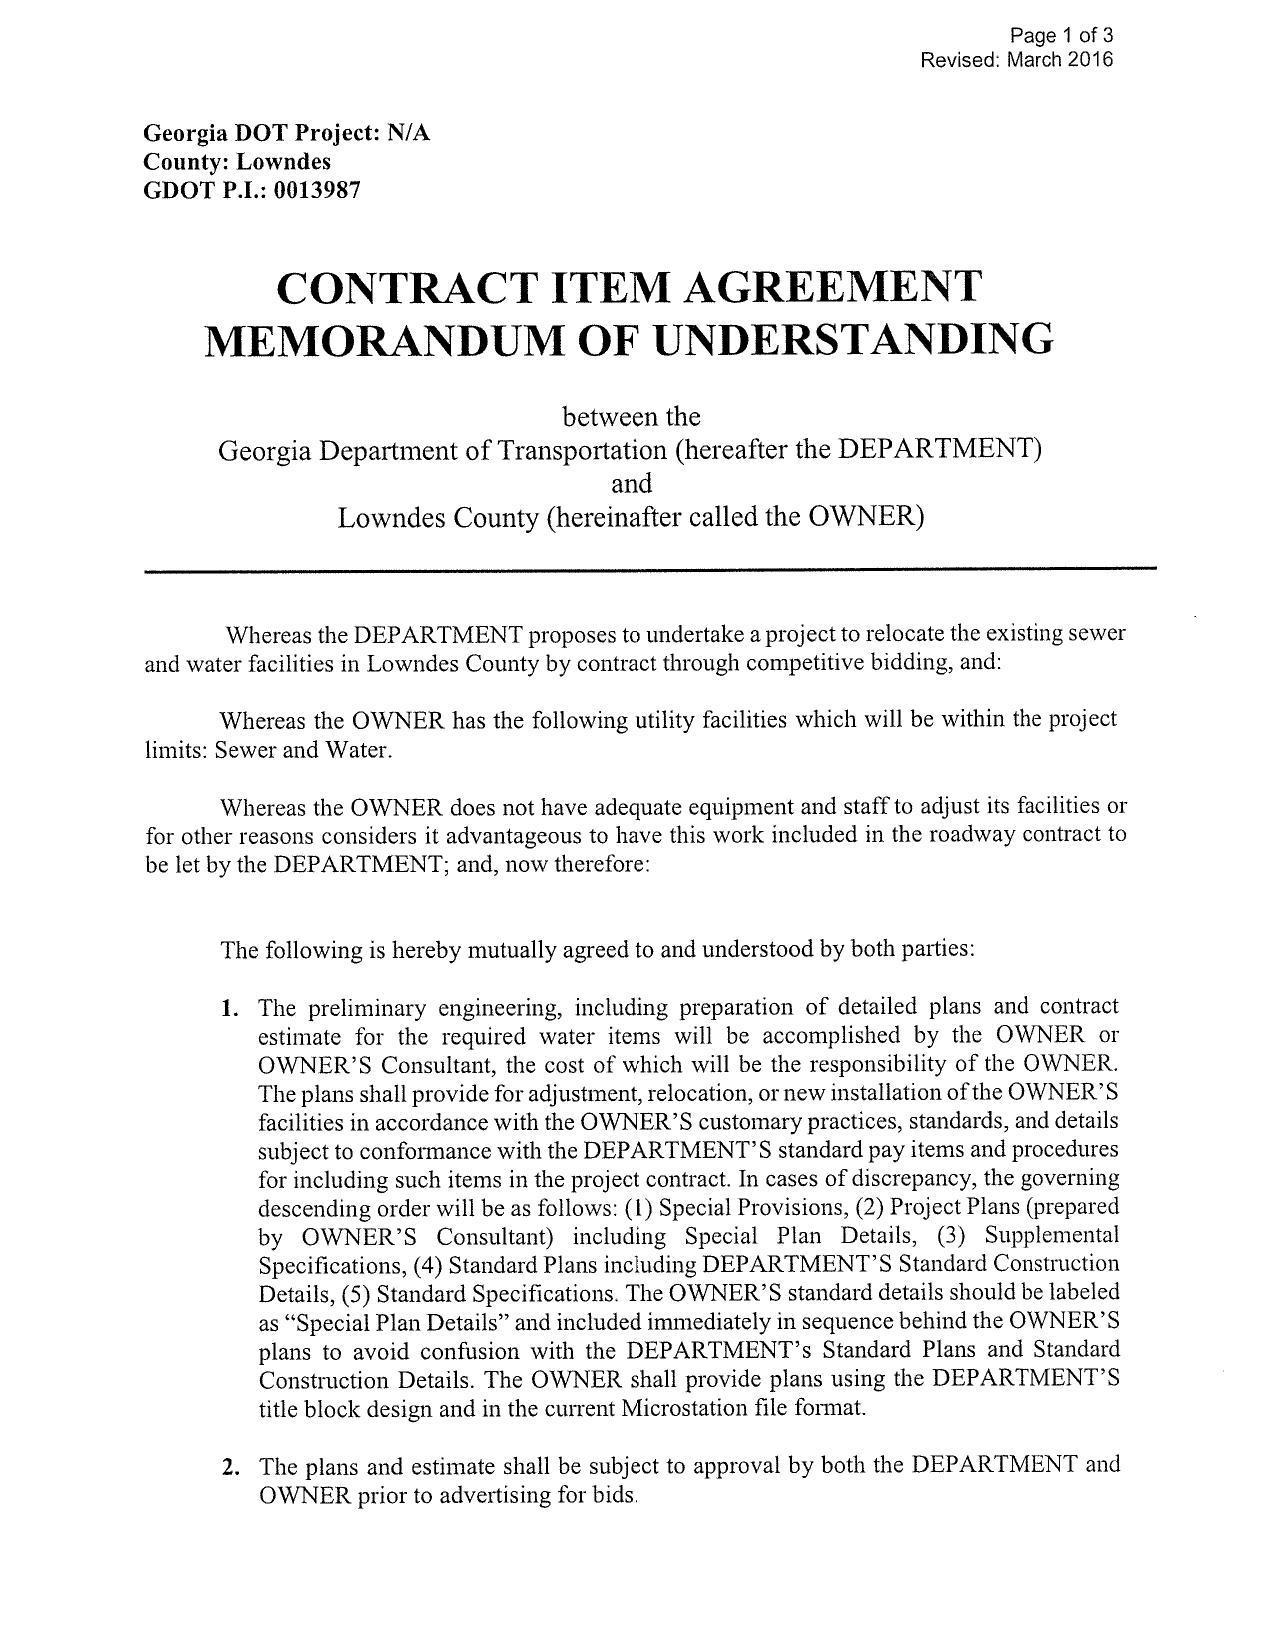 CONTRACT ITEM AGREEMENT: widening Lake Park Bellville Rd. from mGA 7 to I-75 will require relocation of county utilities